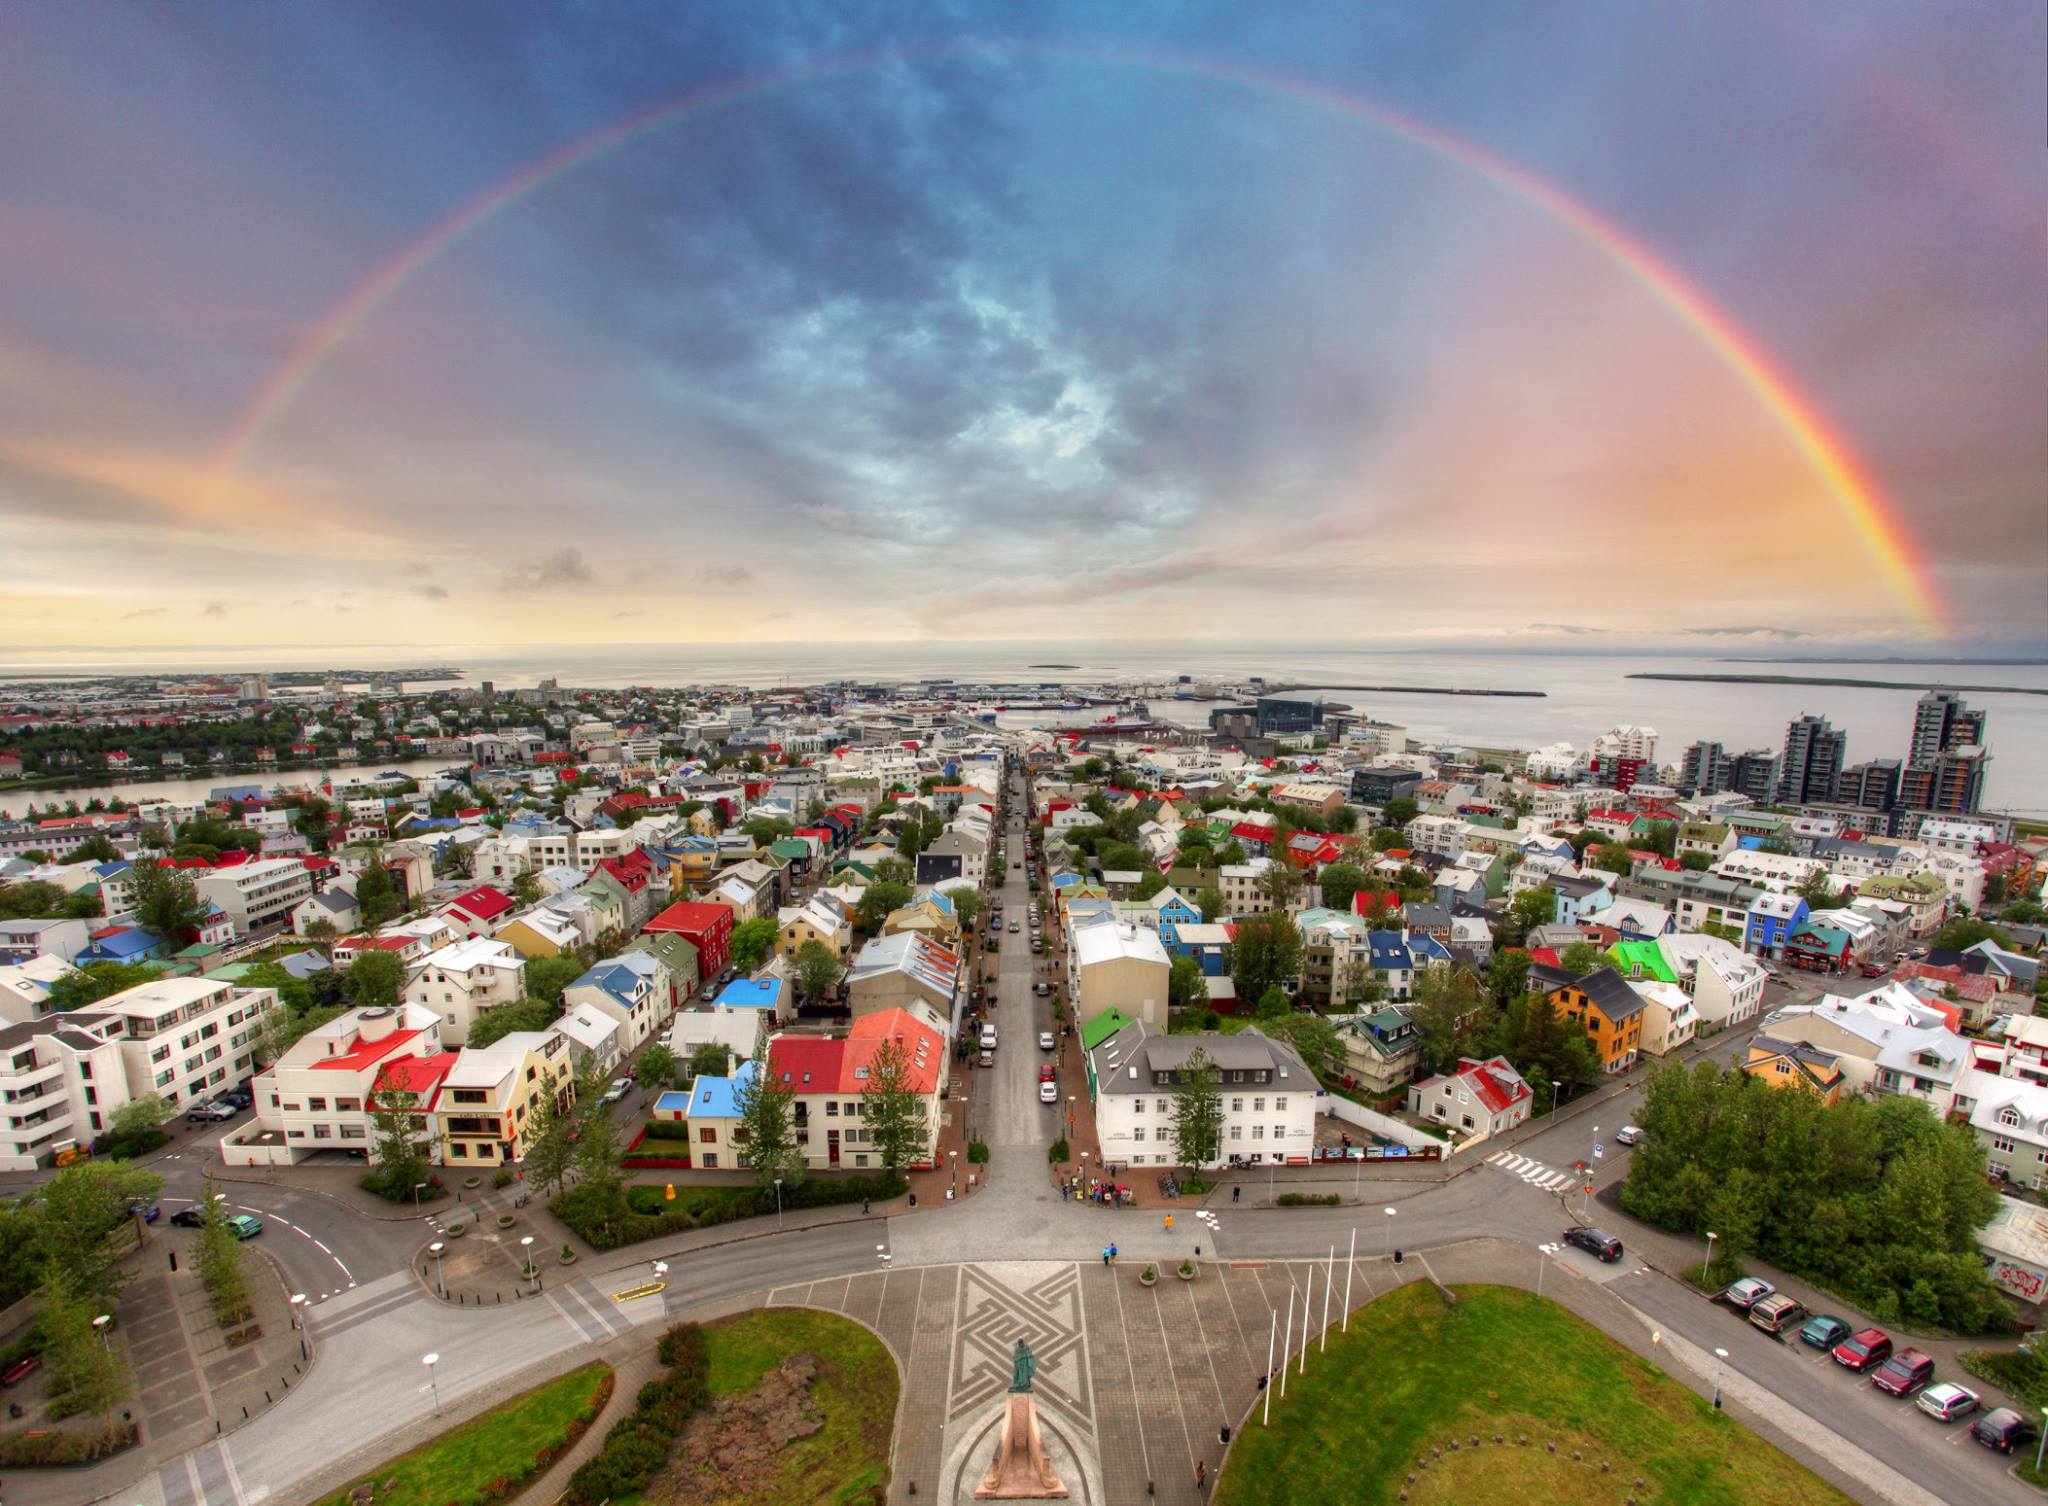 Reykjavík's skyline is most notable for its patchwork quilt of coloured tin roofs.